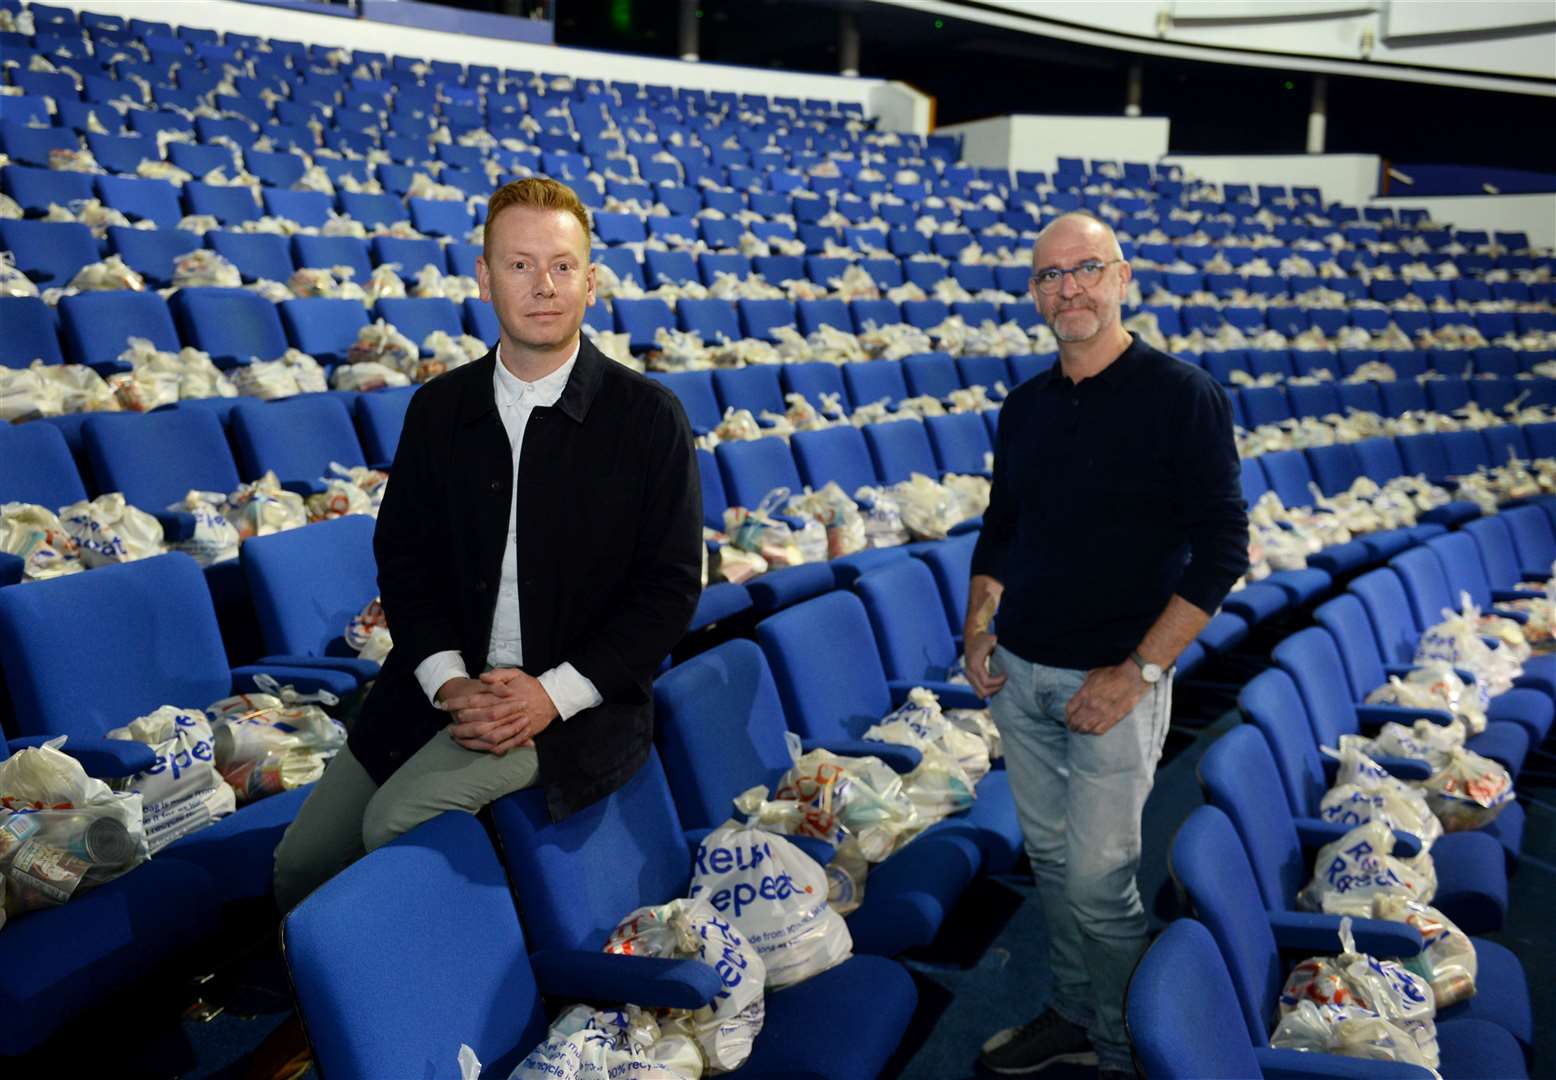 James Mackenzie-Blackman with Steven Wren in the theatre as it was transformed into a distribution hub for food packages.